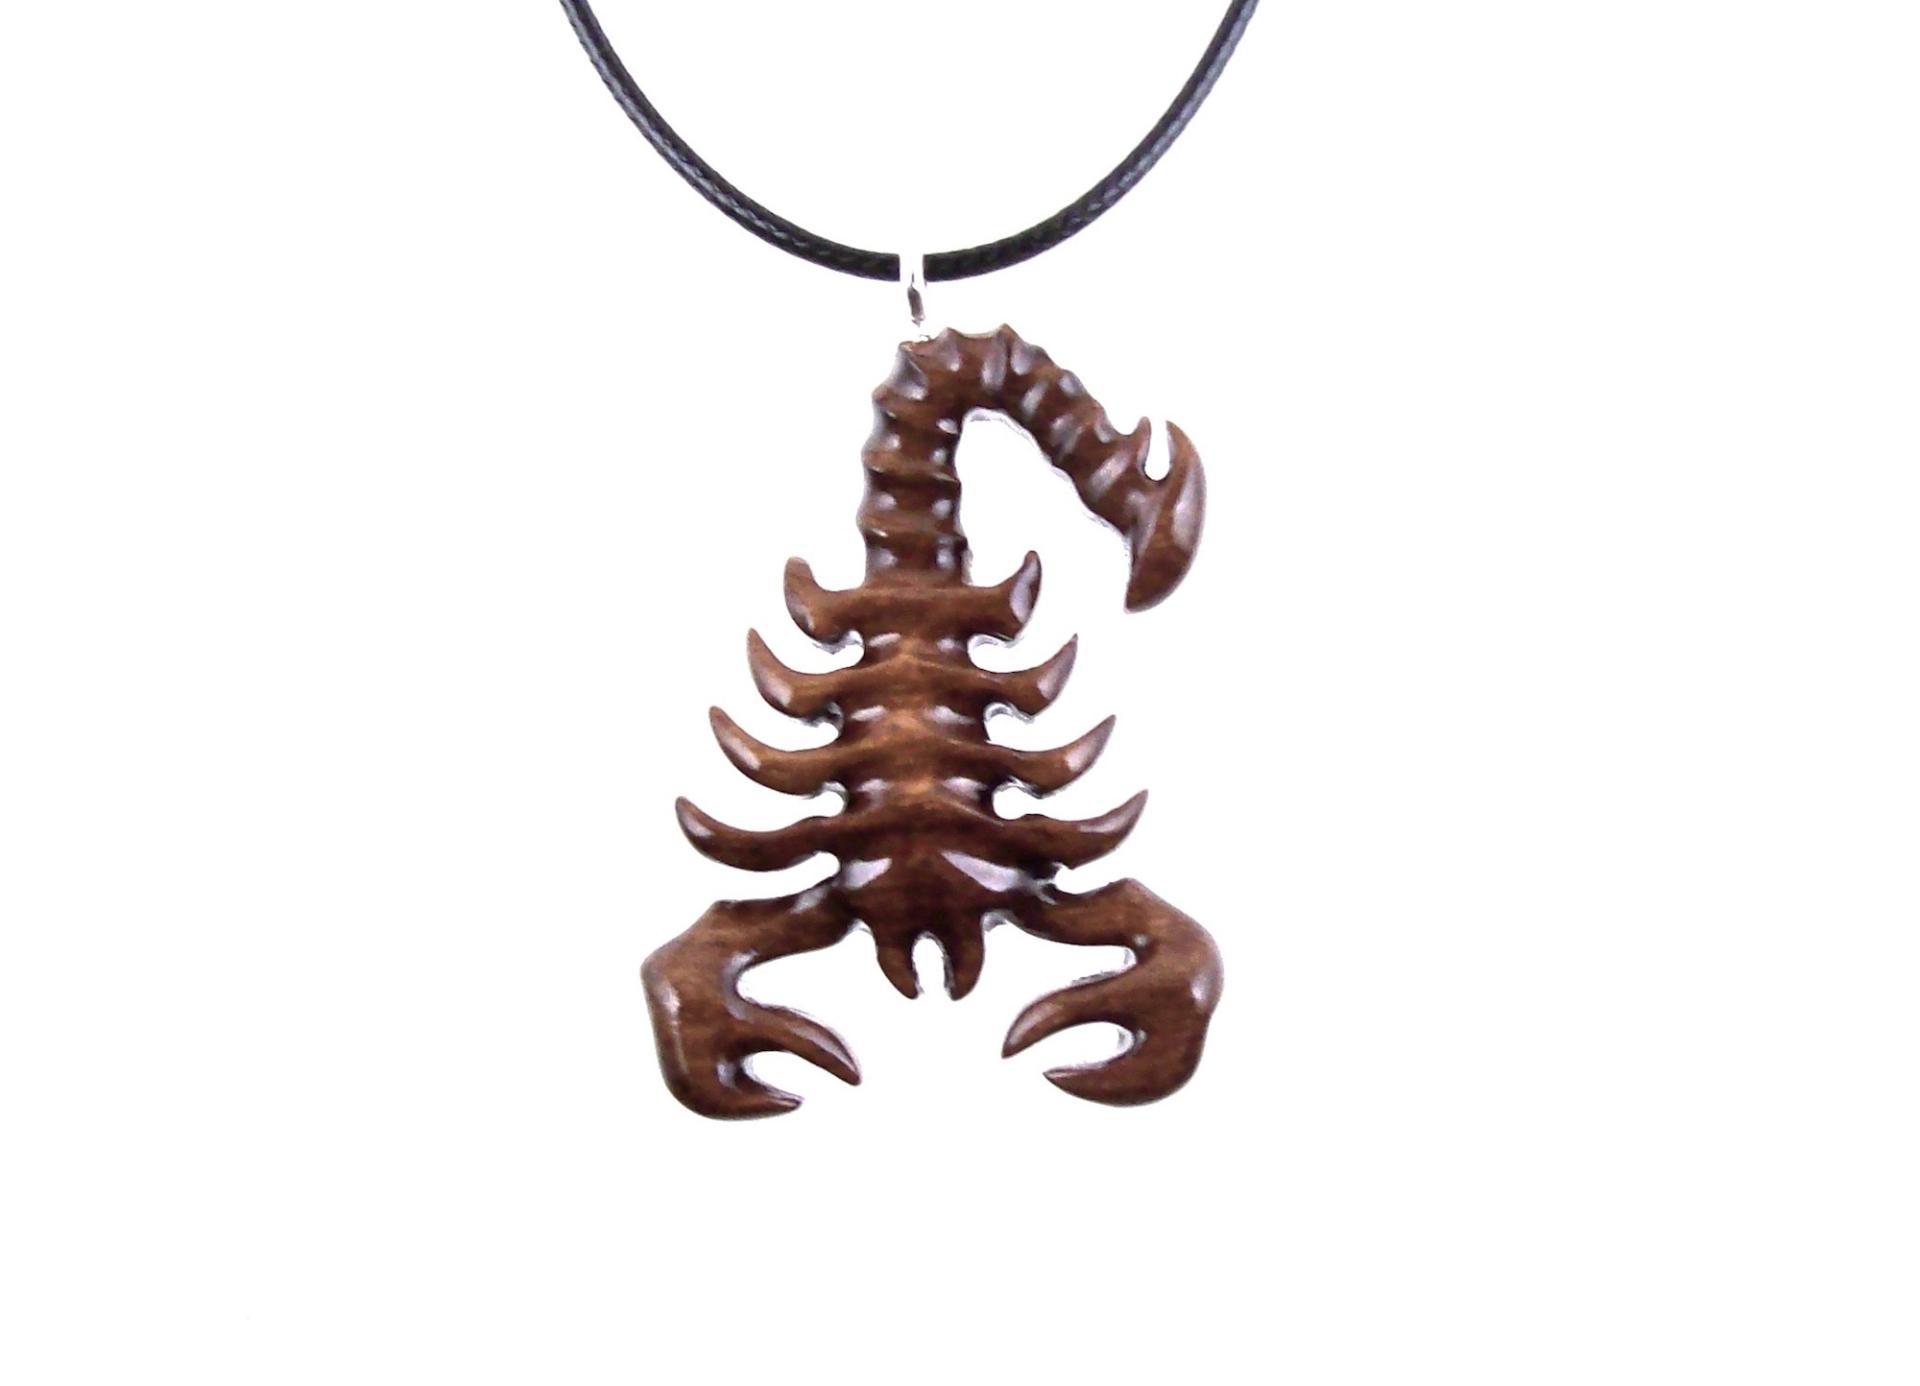 Scorpion Necklace, Wooden Scorpion Pendant, Hand Carved Scorpio Jewelry, Totem Spirit Animal Mens Wood Necklace, Gift for Him